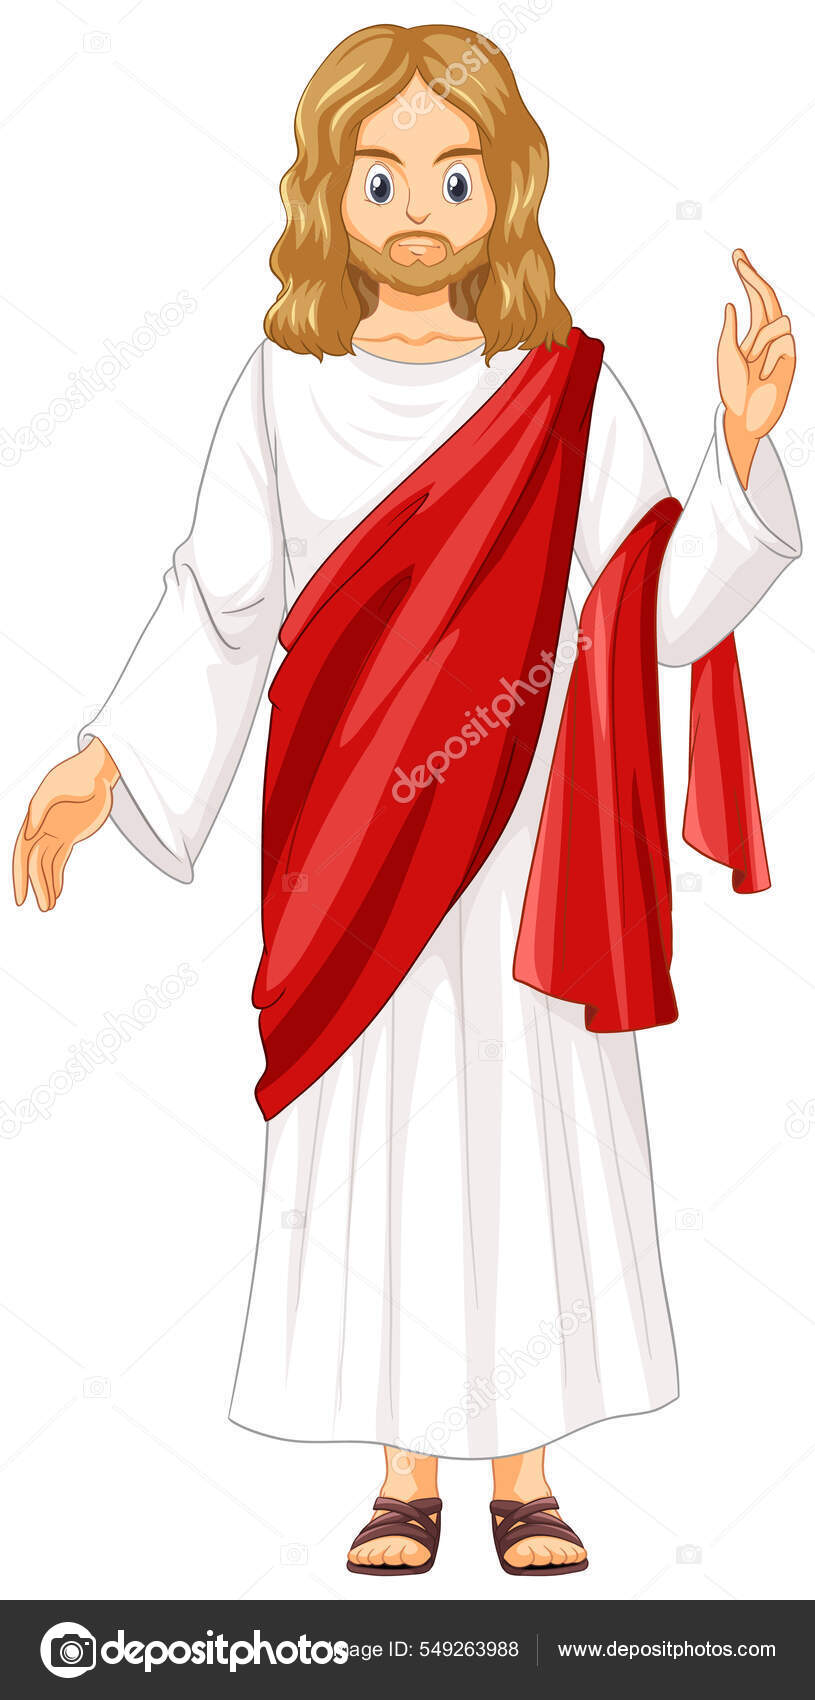 Jesus Cartoon Character White Background Illustration Stock Vector Image by  ©interactimages #549263988